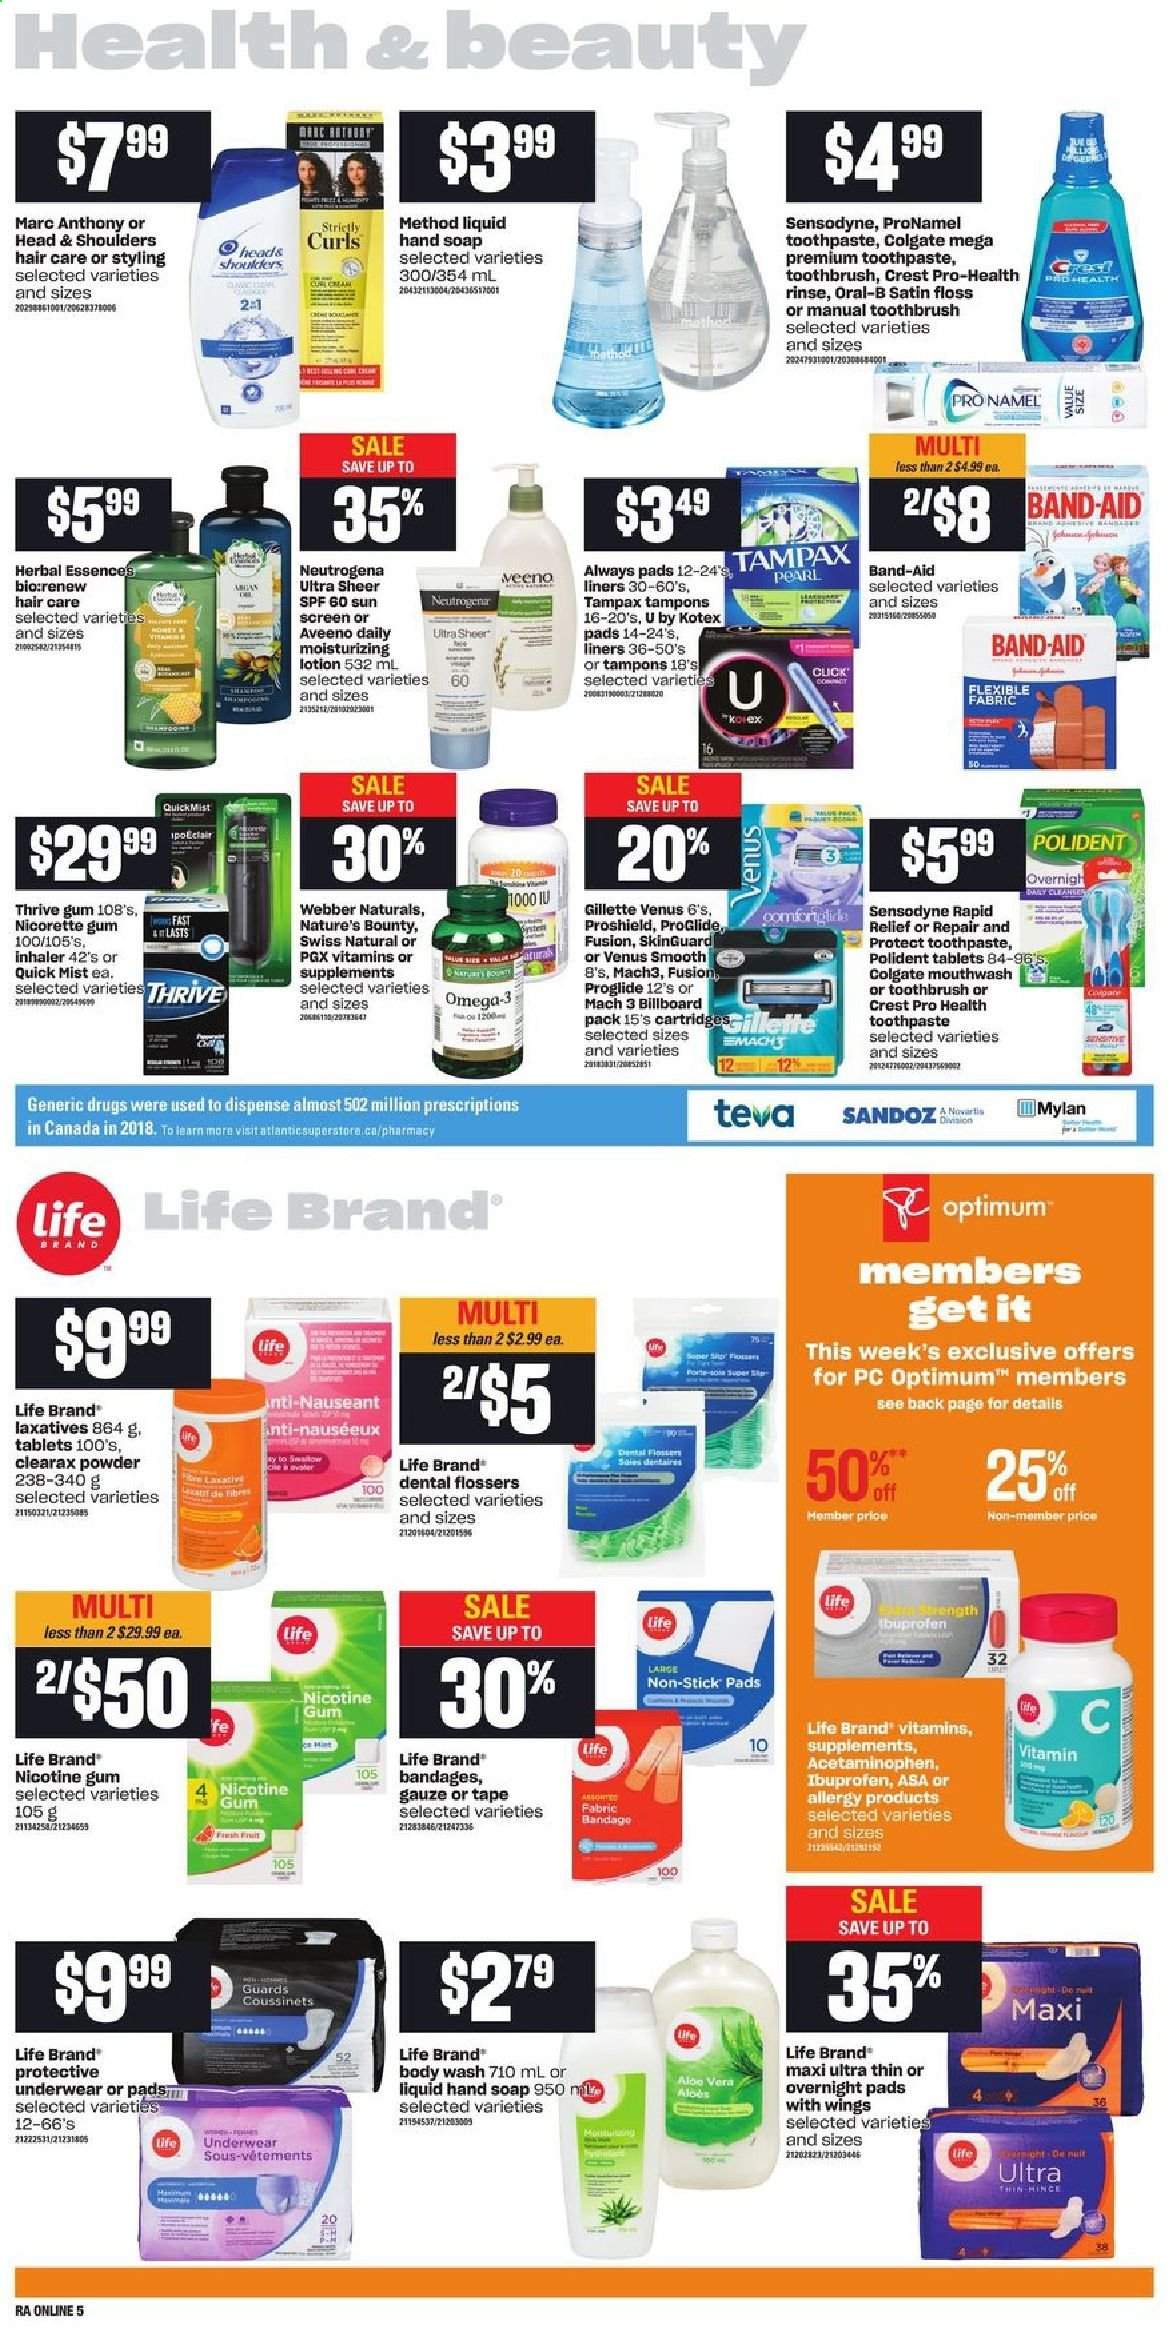 thumbnail - Atlantic Superstore Flyer - June 10, 2021 - June 16, 2021 - Sales products - Aveeno, cleaner, body wash, hand soap, soap, toothbrush, toothpaste, mouthwash, Polident, Crest, Always pads, sanitary pads, Kotex, Kotex pads, tampons, Herbal Essences, body lotion, Venus, Optimum, Nature's Bounty, Nicorette, nicotine therapy, Ibuprofen, Omega-3, Nicorette Gum, Gillette, Neutrogena, Tampax, Head & Shoulders, Oral-B, Sensodyne. Page 12.